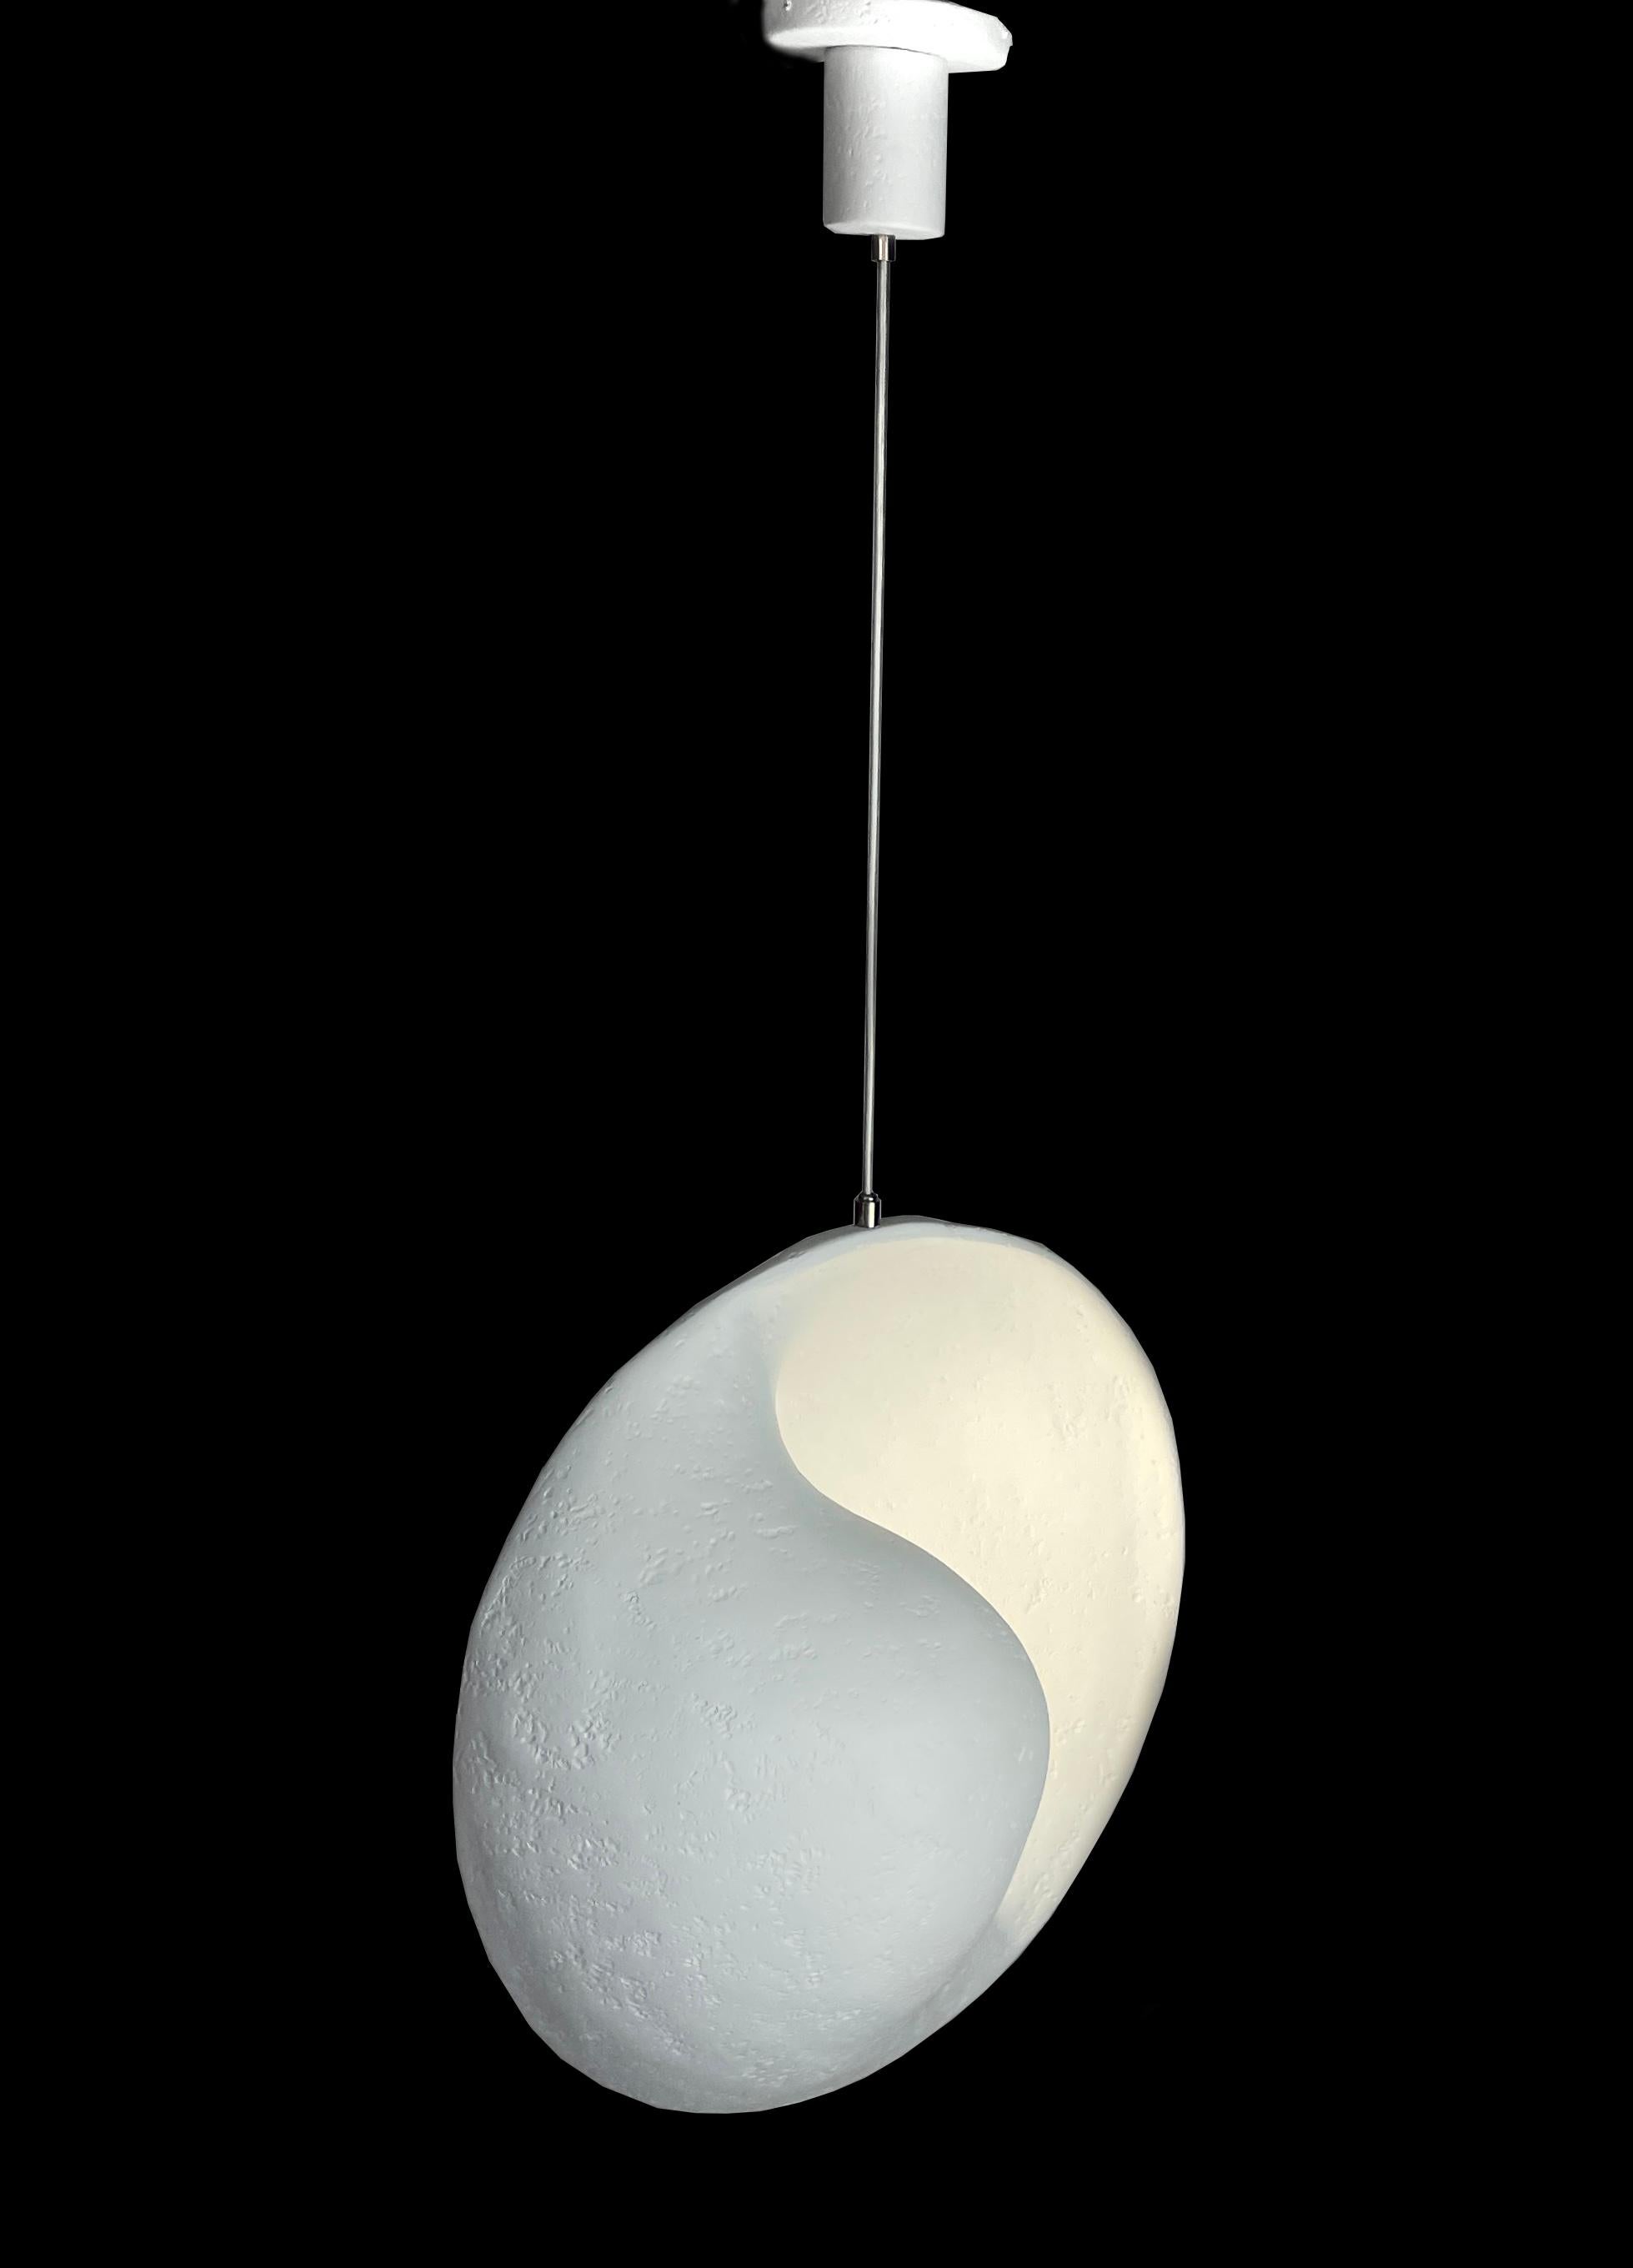 Hand sculpted plaster of Paris chandelier enhancing soft and pure lines. The chandelier features a center circular light diffusing a peaceful glow. Your room will be magically transformed to a restful world.
The dimensions of the plaster piece